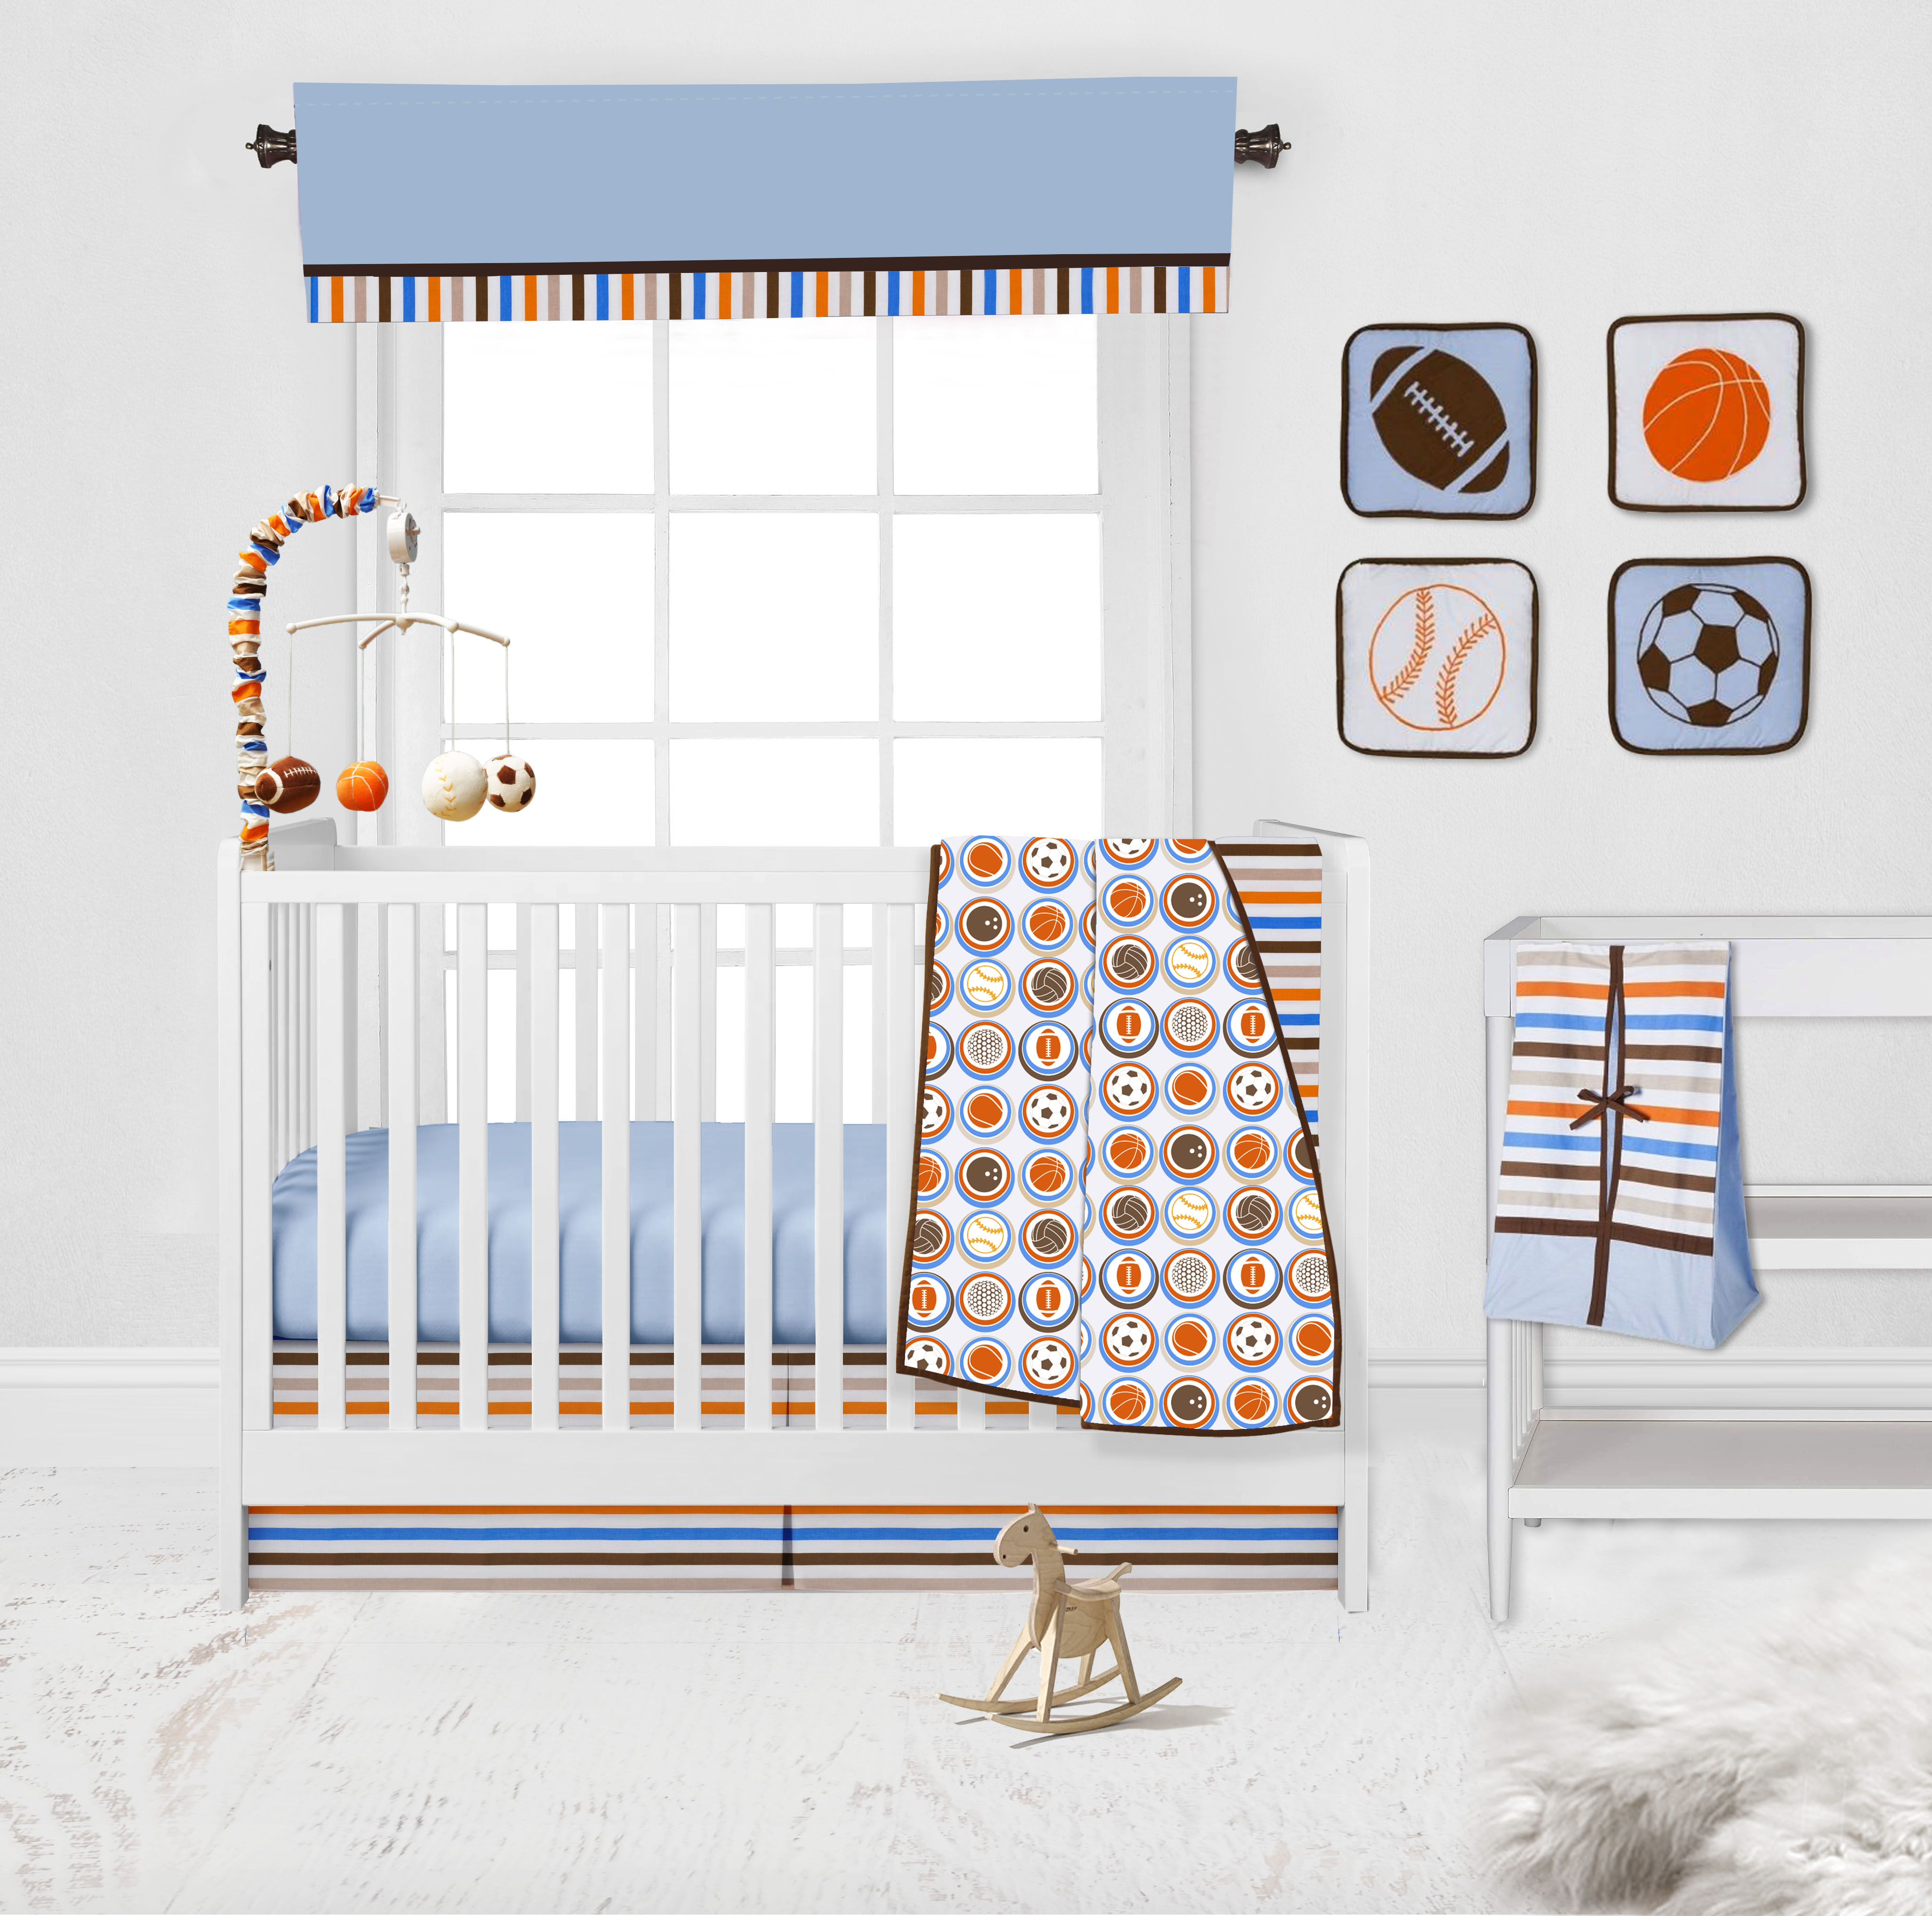 Bacati - Mod Sports 11-Piece Nursery in a Bag Crib Bedding Set 100% Cotton Percale Boys Crib Bedding Set with 2 crib fitted sheets - image 1 of 8